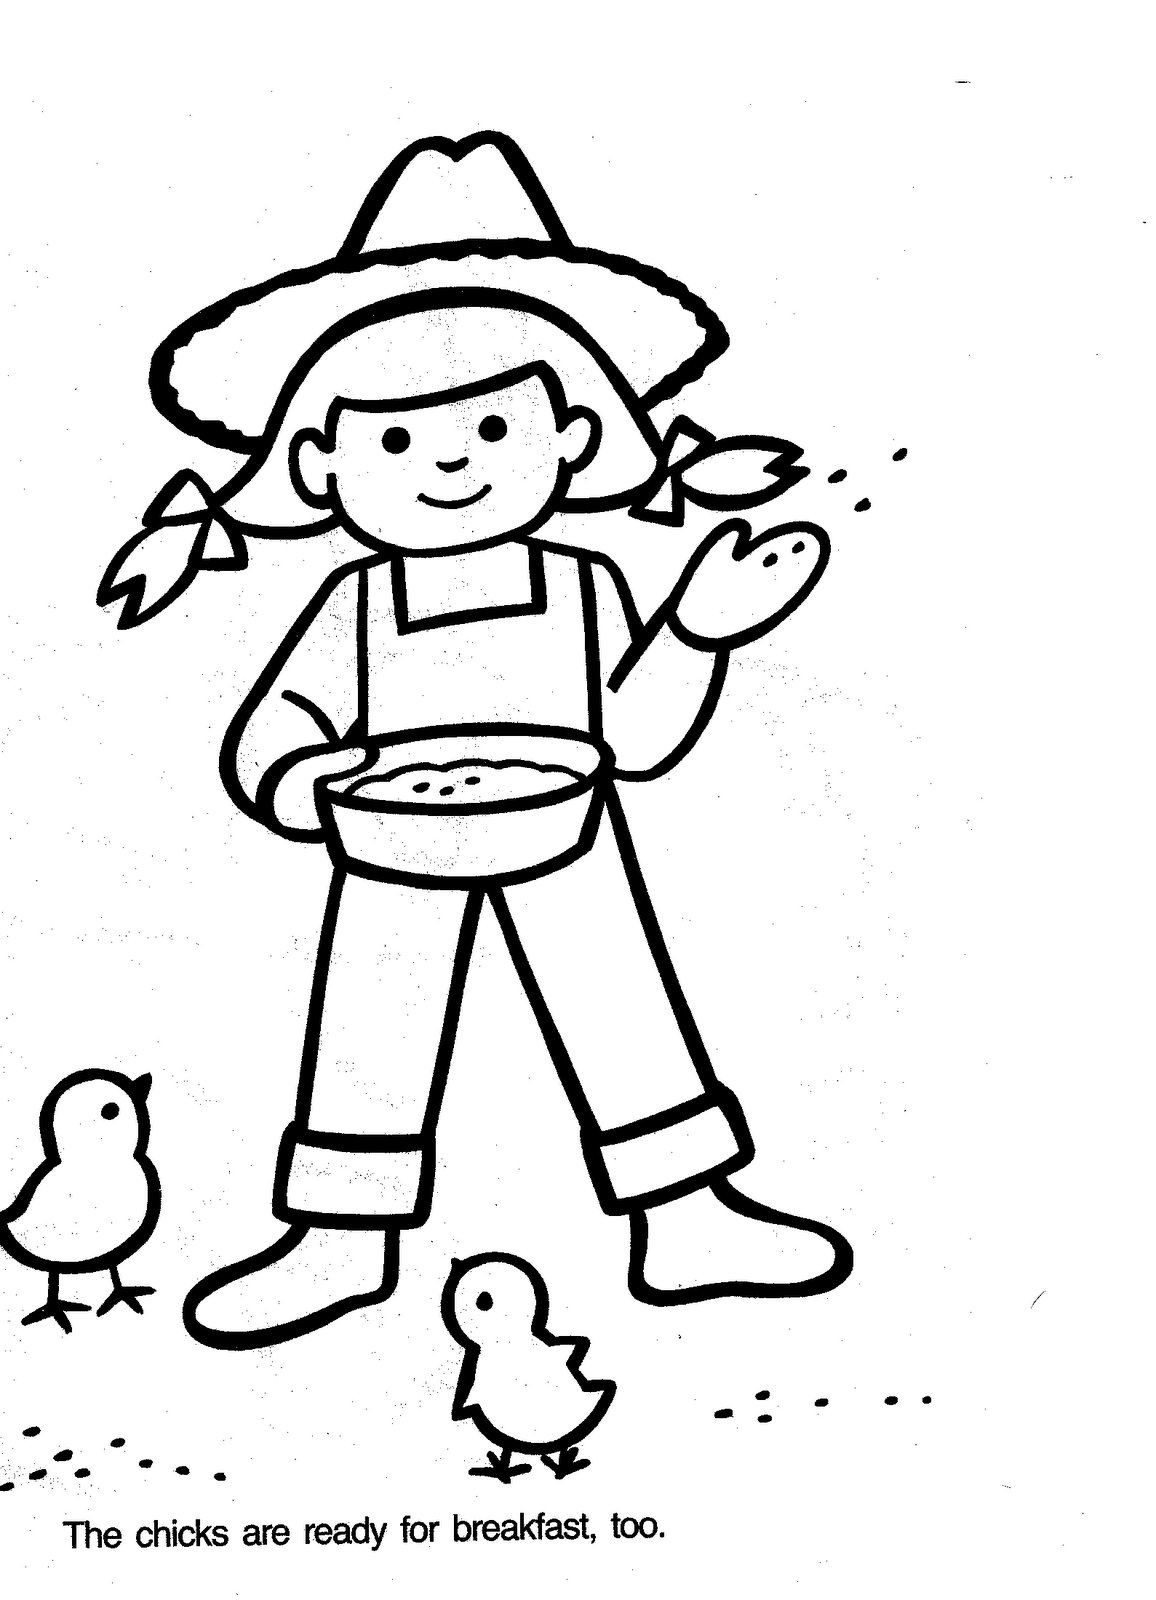 Senses Coloring Pages 100 Images 224 5 Sentidos Colouring Pictures